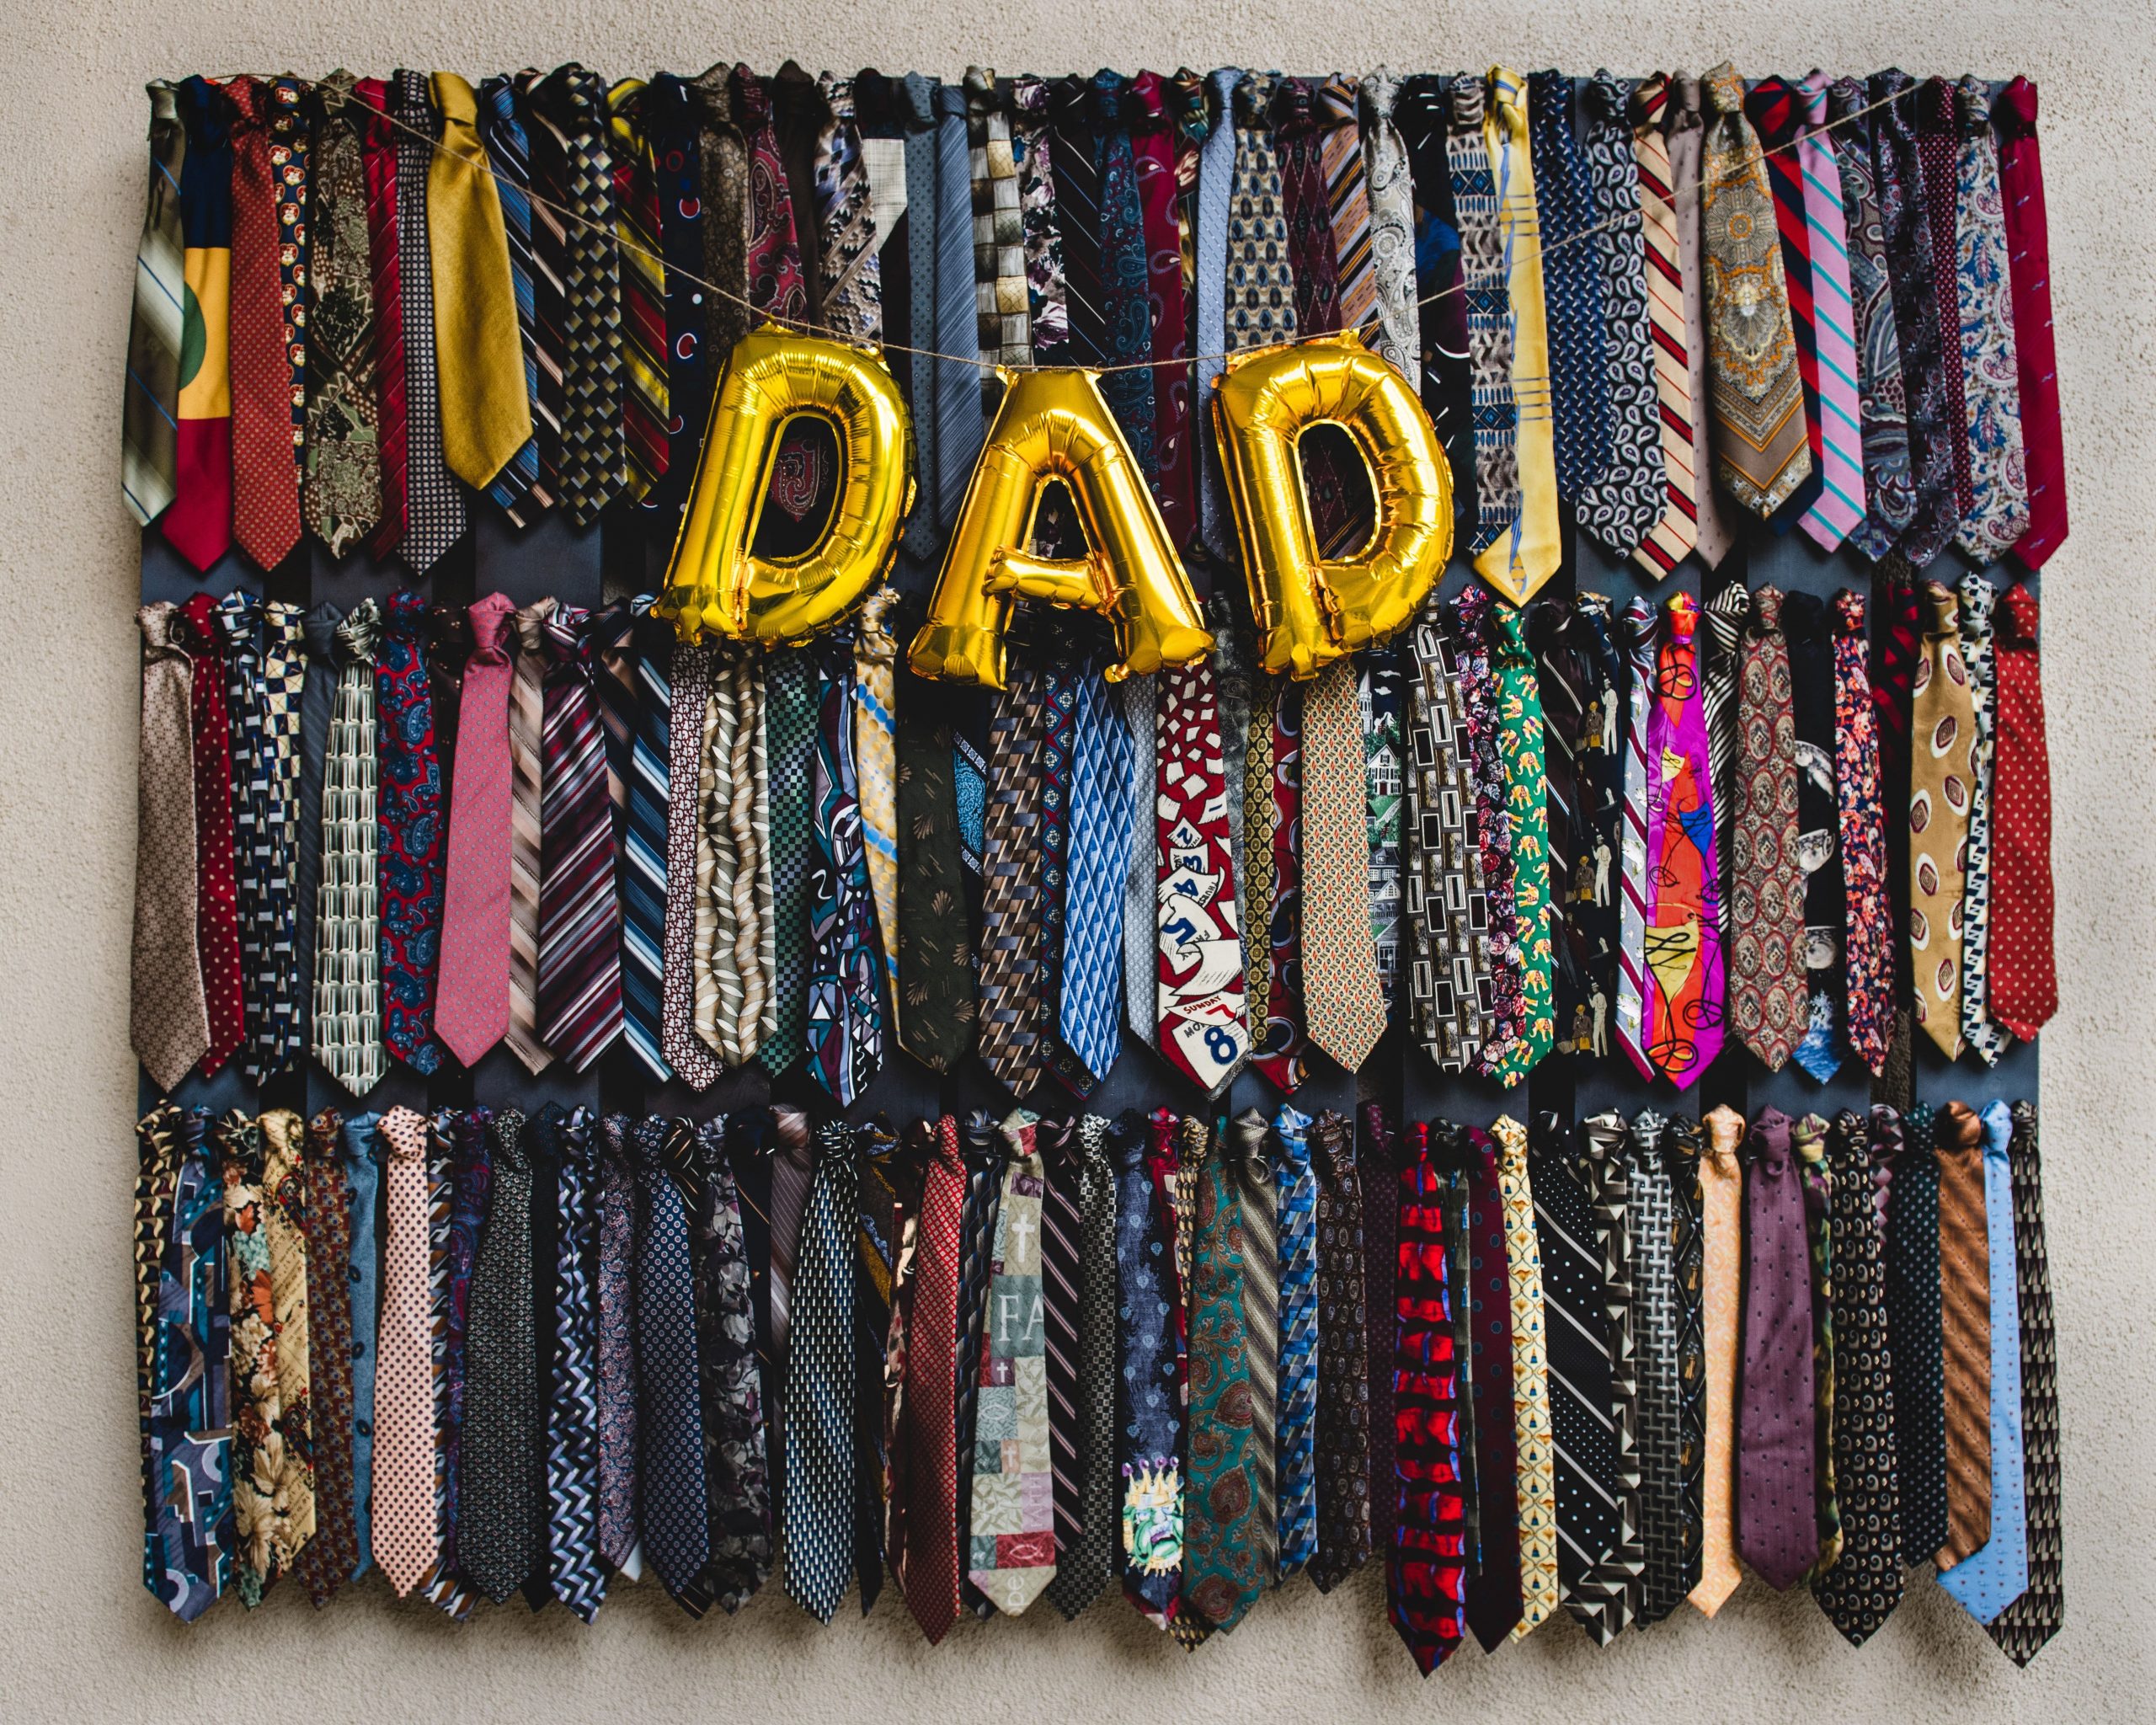 7 Father’s Day gifts for single dads